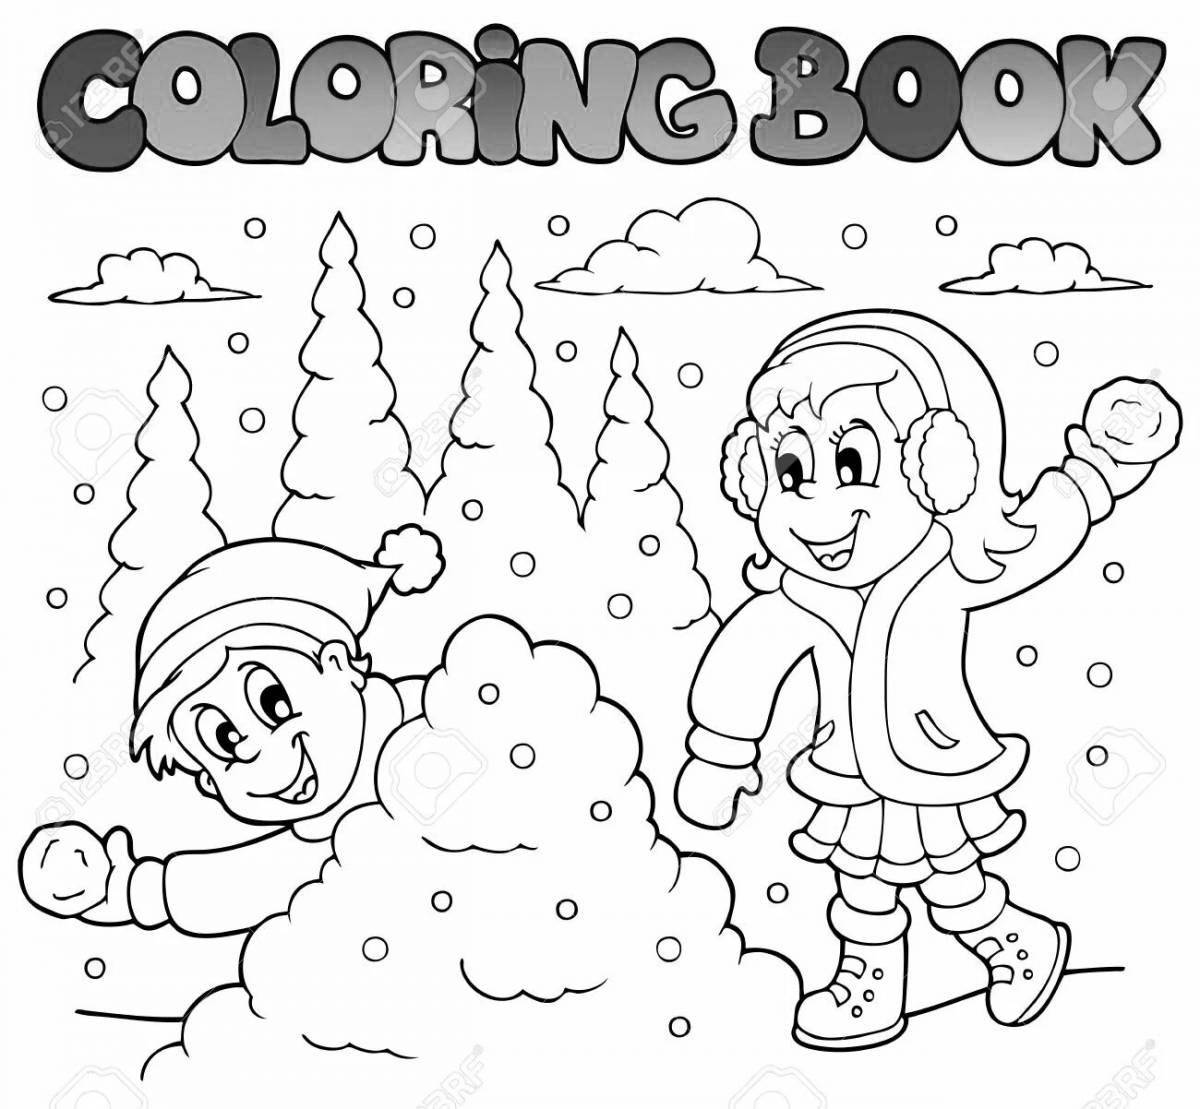 Coloring book bright children playing snowballs